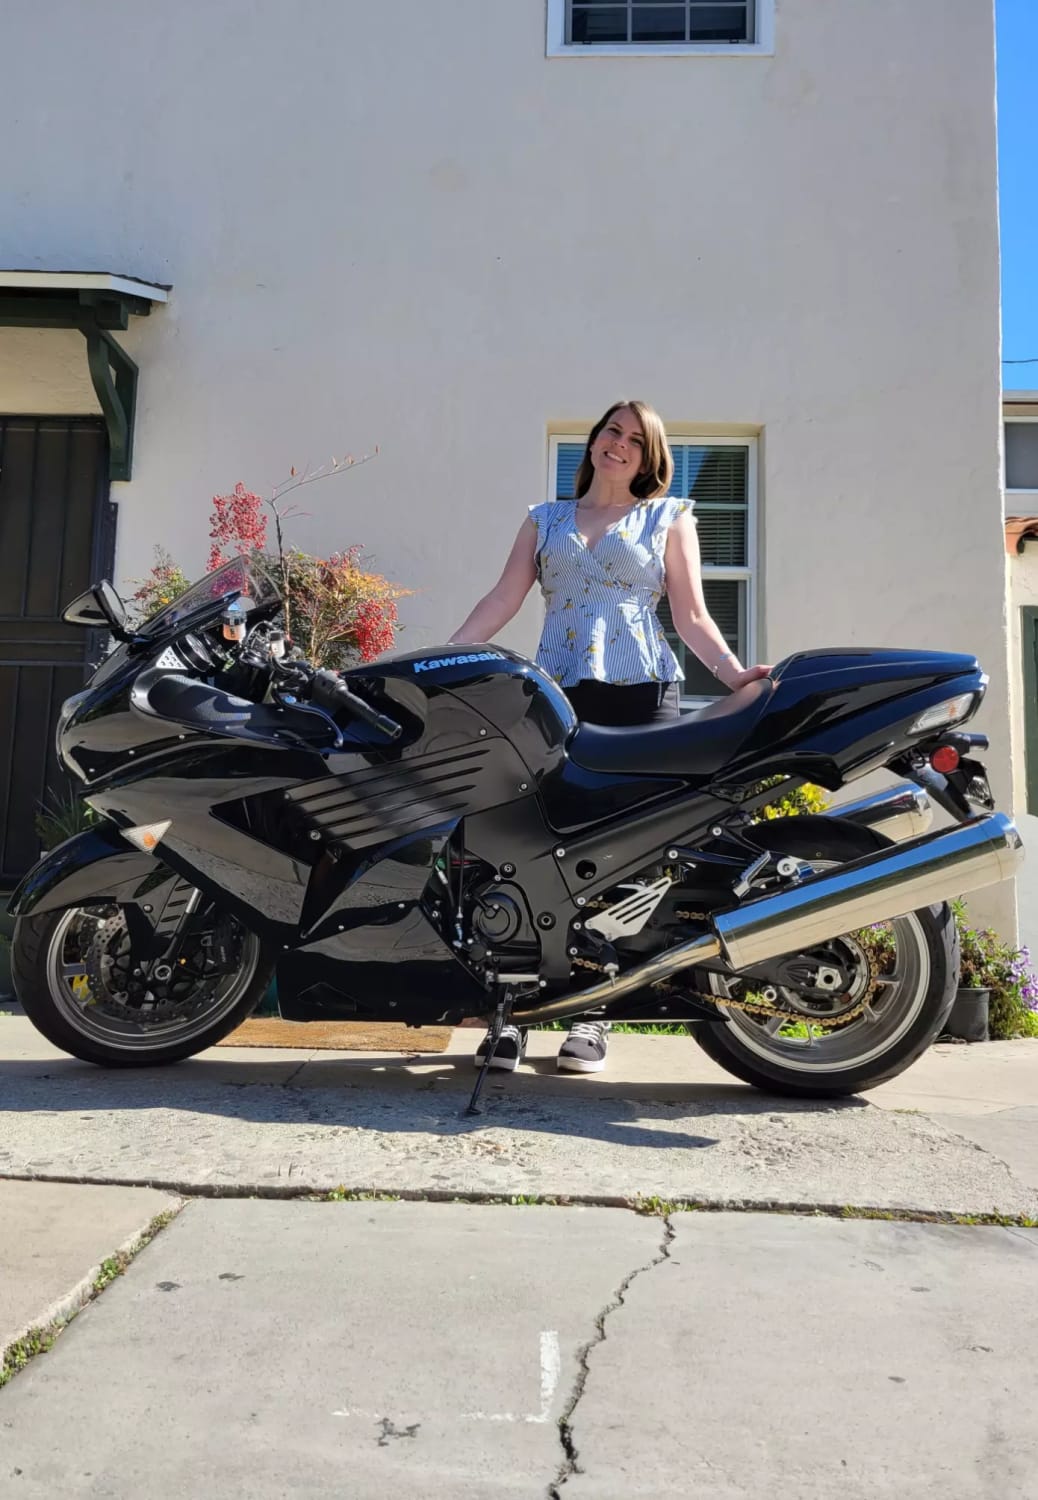 I'M FINALLY BACK ON TWO WHEELS! In 2017 I was t-boned at low speed on my GSXR 750. Life just got in the way of replacing my beloved gixxer until a family friend brought an offer to me that was almost too good to be true. Now I'm the proud owner of this immaculately kept 07 ZX14